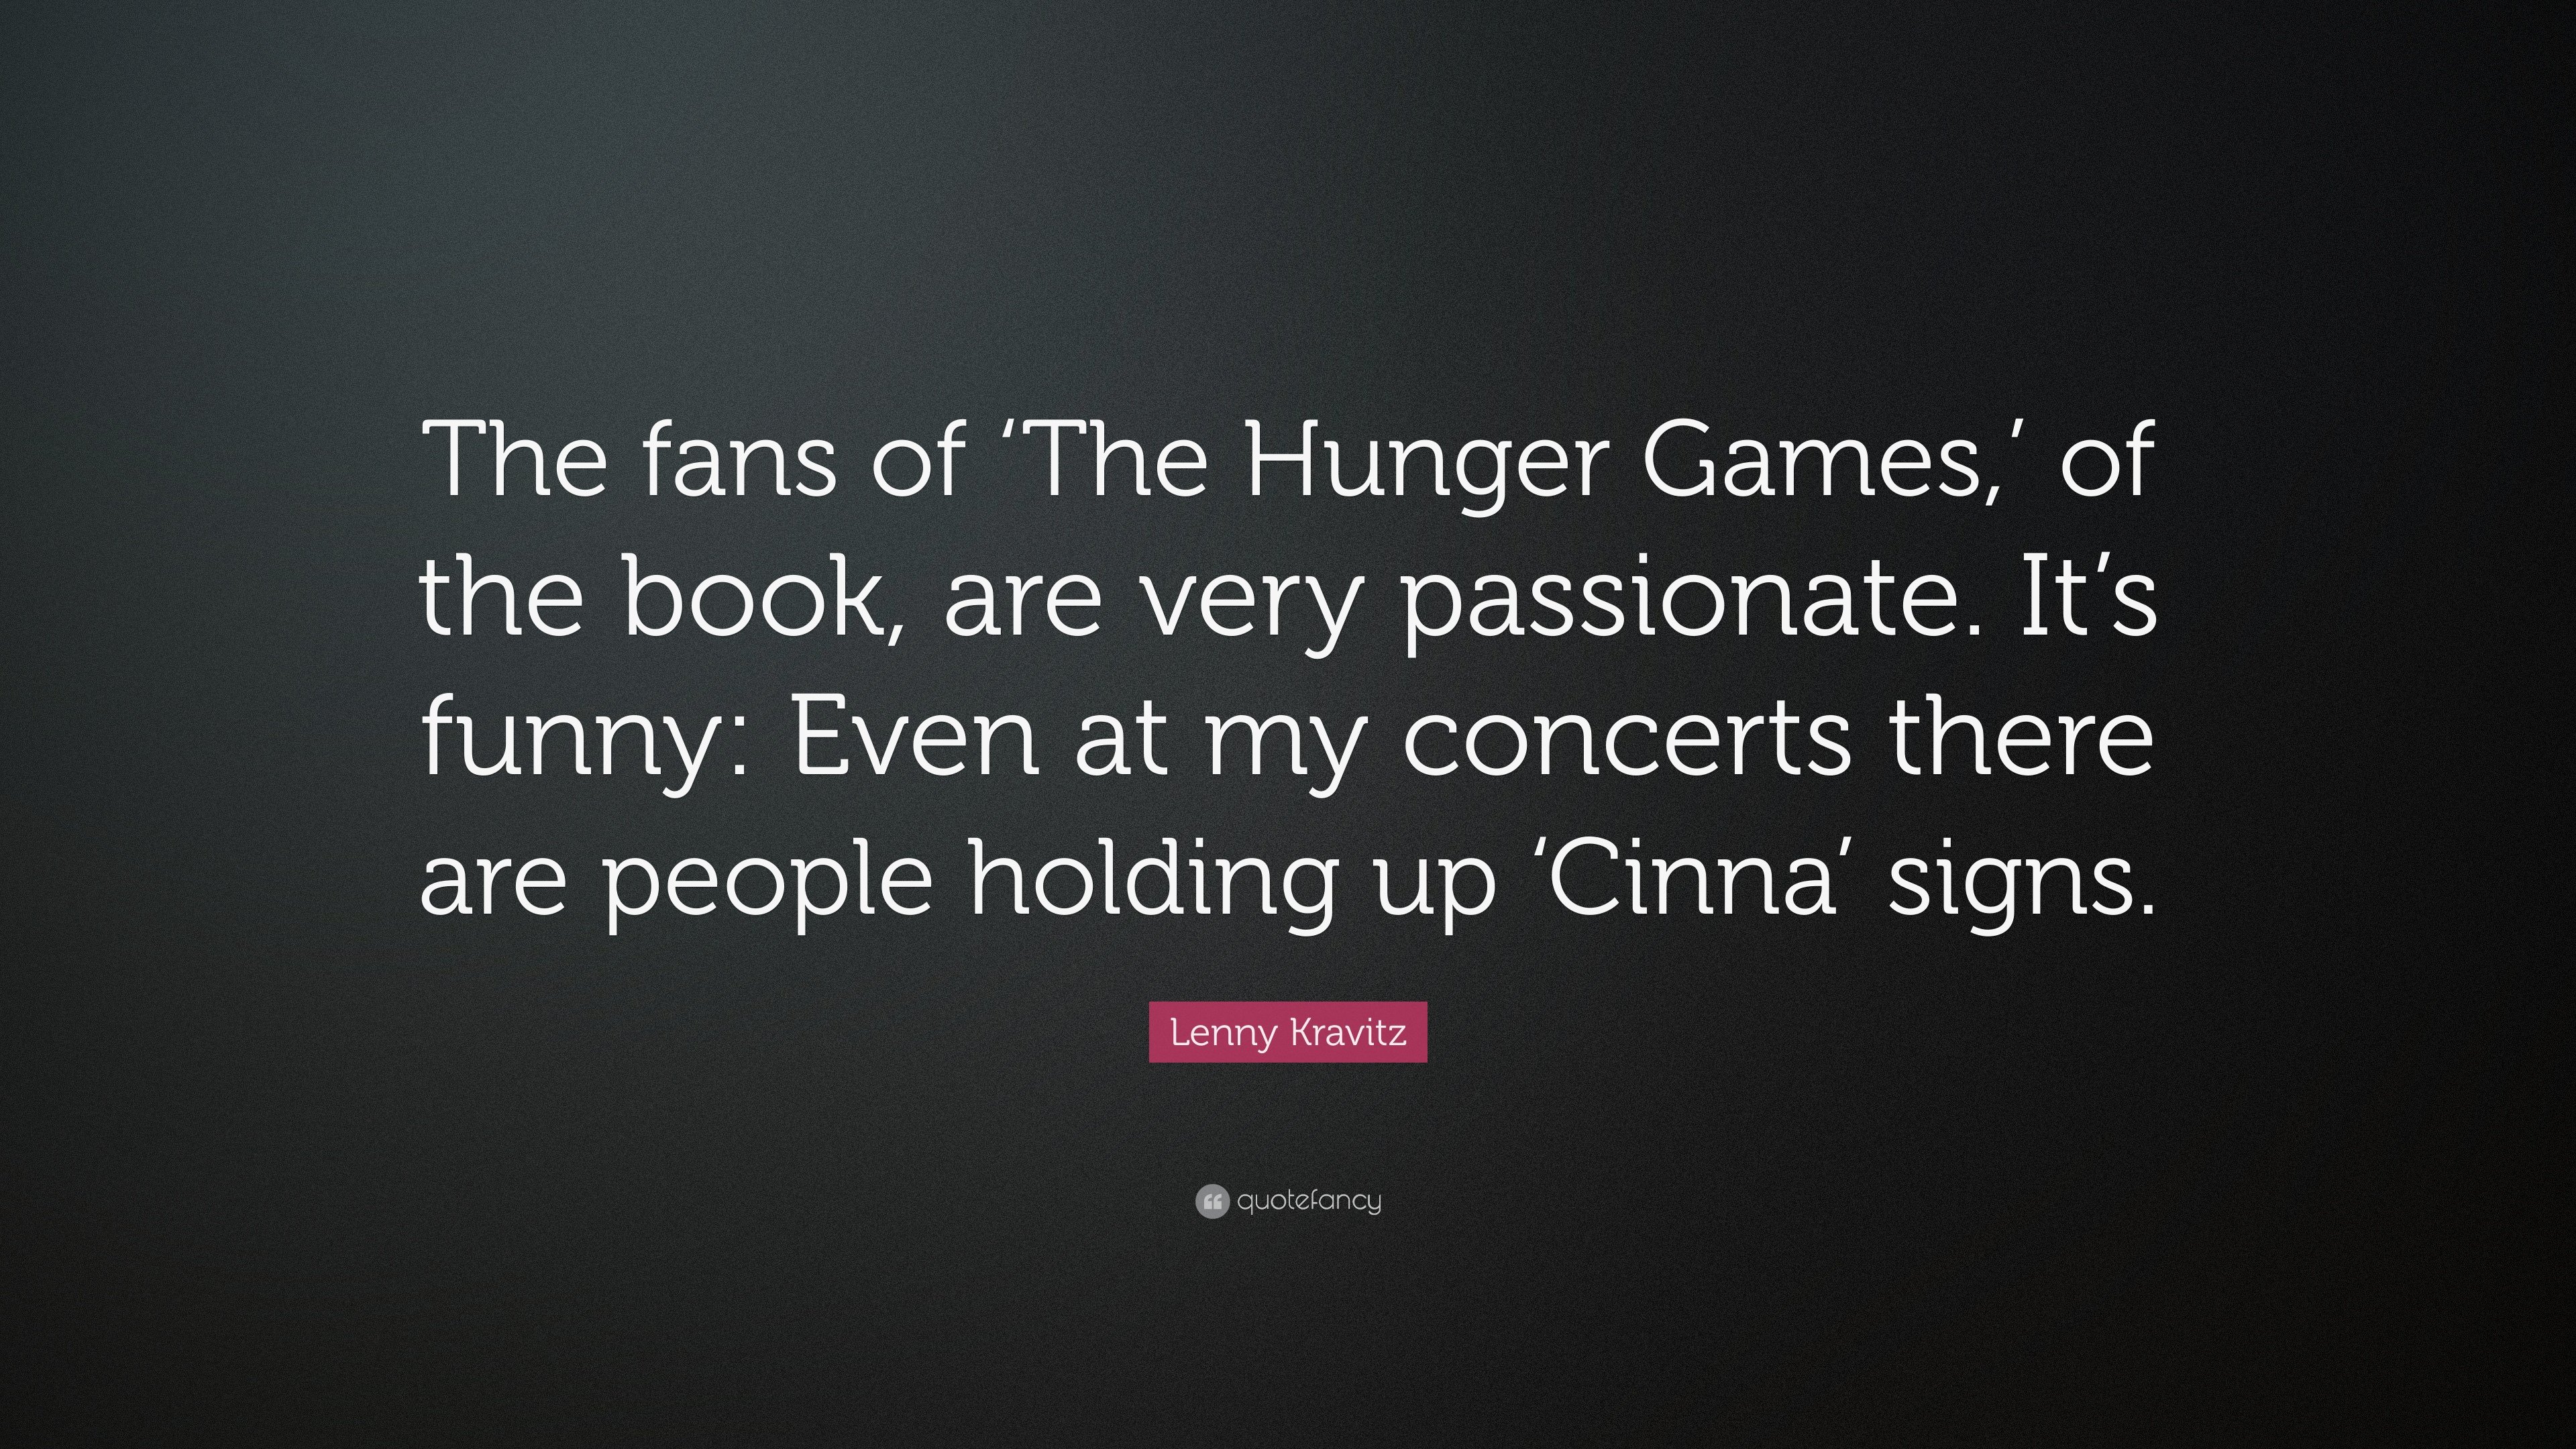 Lenny Kravitz Quote: “The fans of 'The Hunger Games, ' of the book, are very passionate. It's funny: Even at my concerts there are people holdi.”